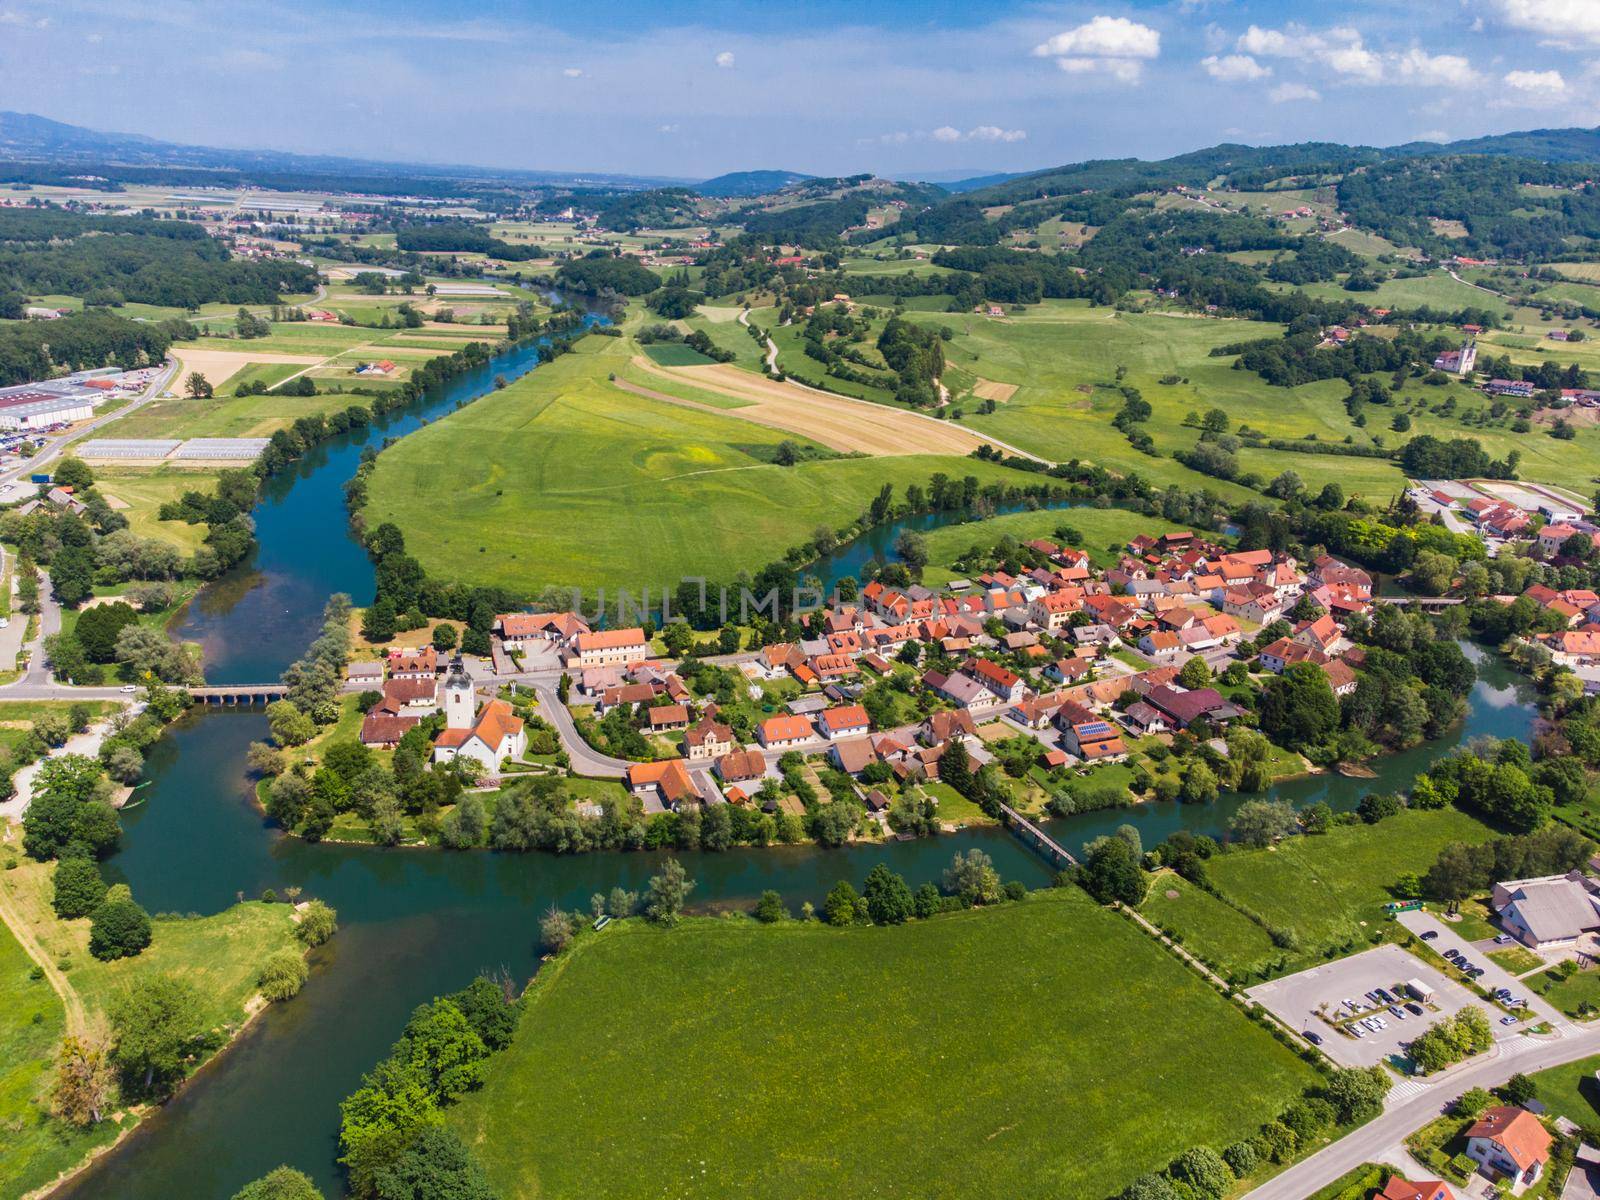 Kostanjevica na Krki Medieval Town Surrounded by Krka River, Slovenia, Europe. Aerial view